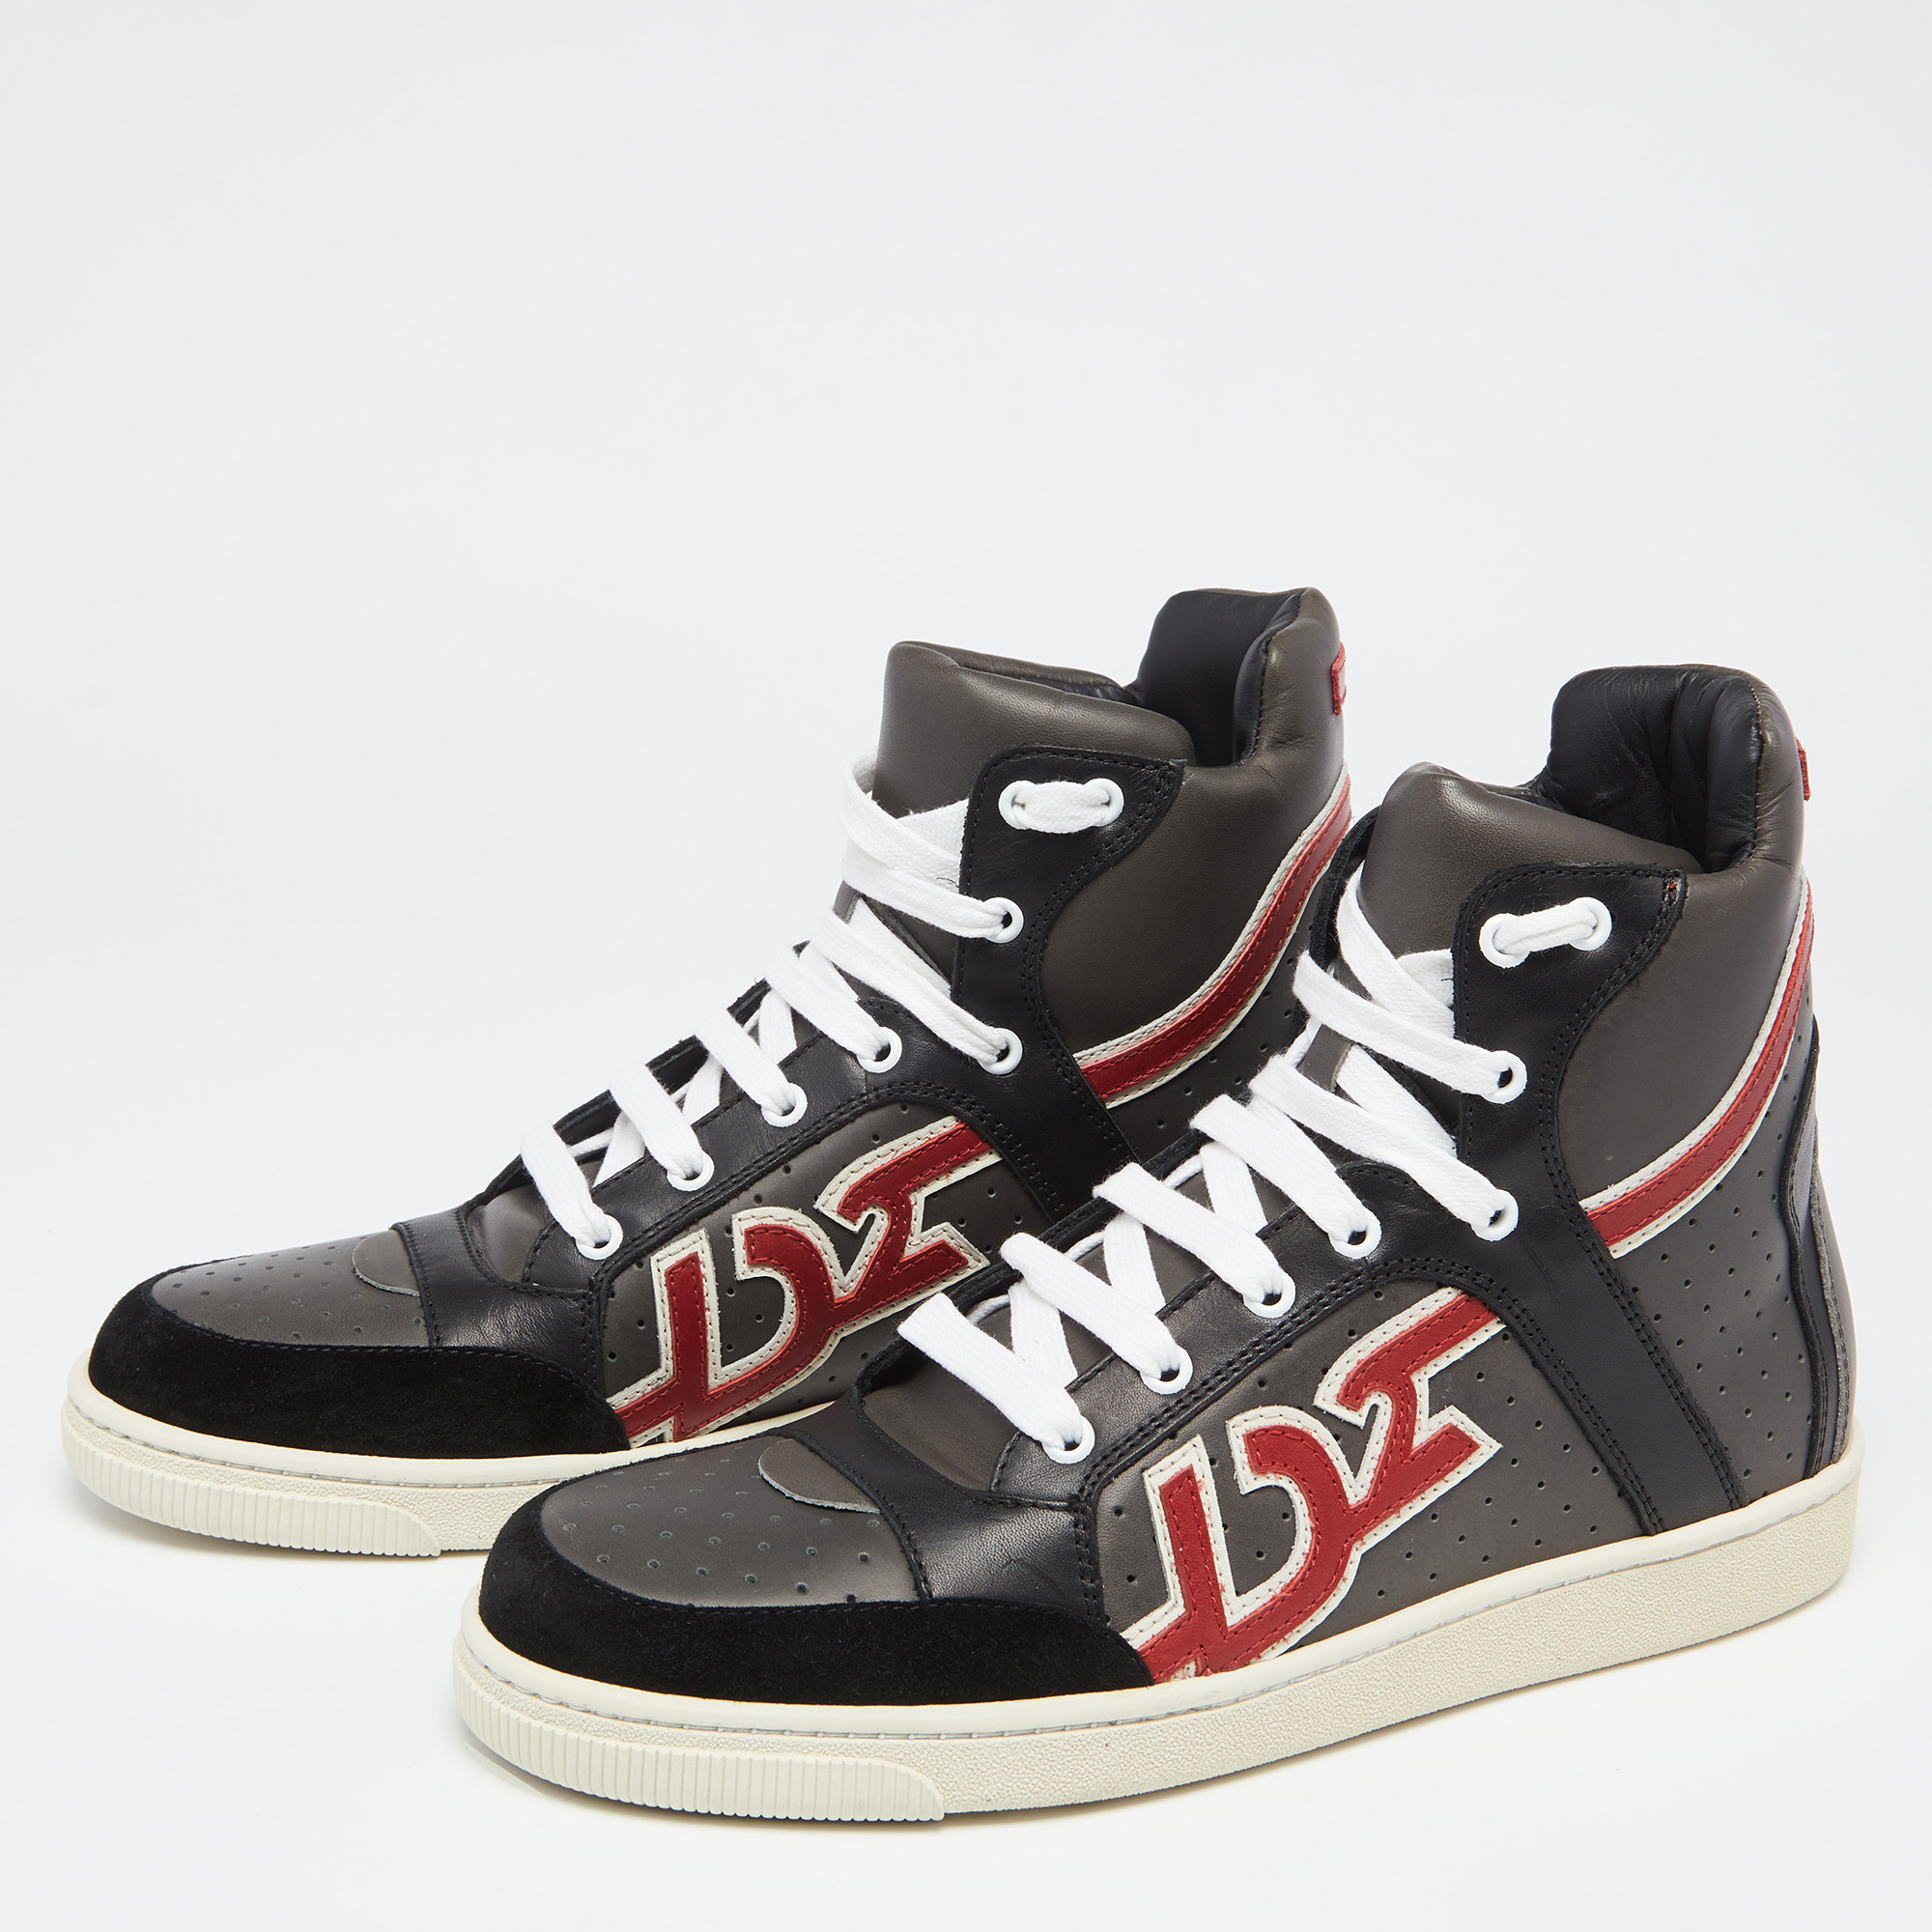 

Dsquared2 Grey/Black Leather And Suede High Top Sneakers Size